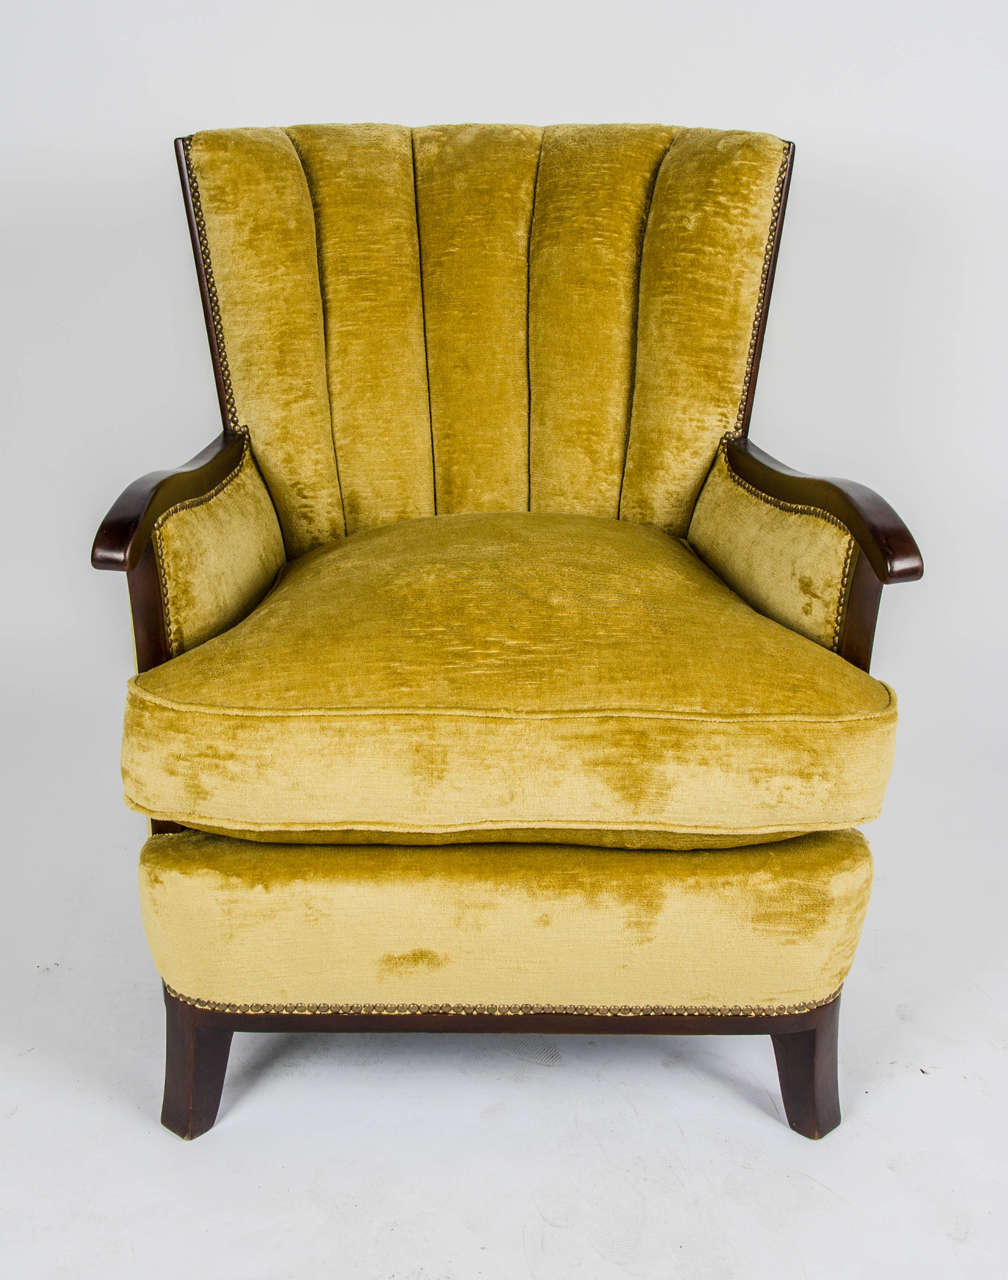 A fine example of a 1940's Club chair. Re-upholstered in a beautiful linen velvet.

Origin France. Maker Unknown